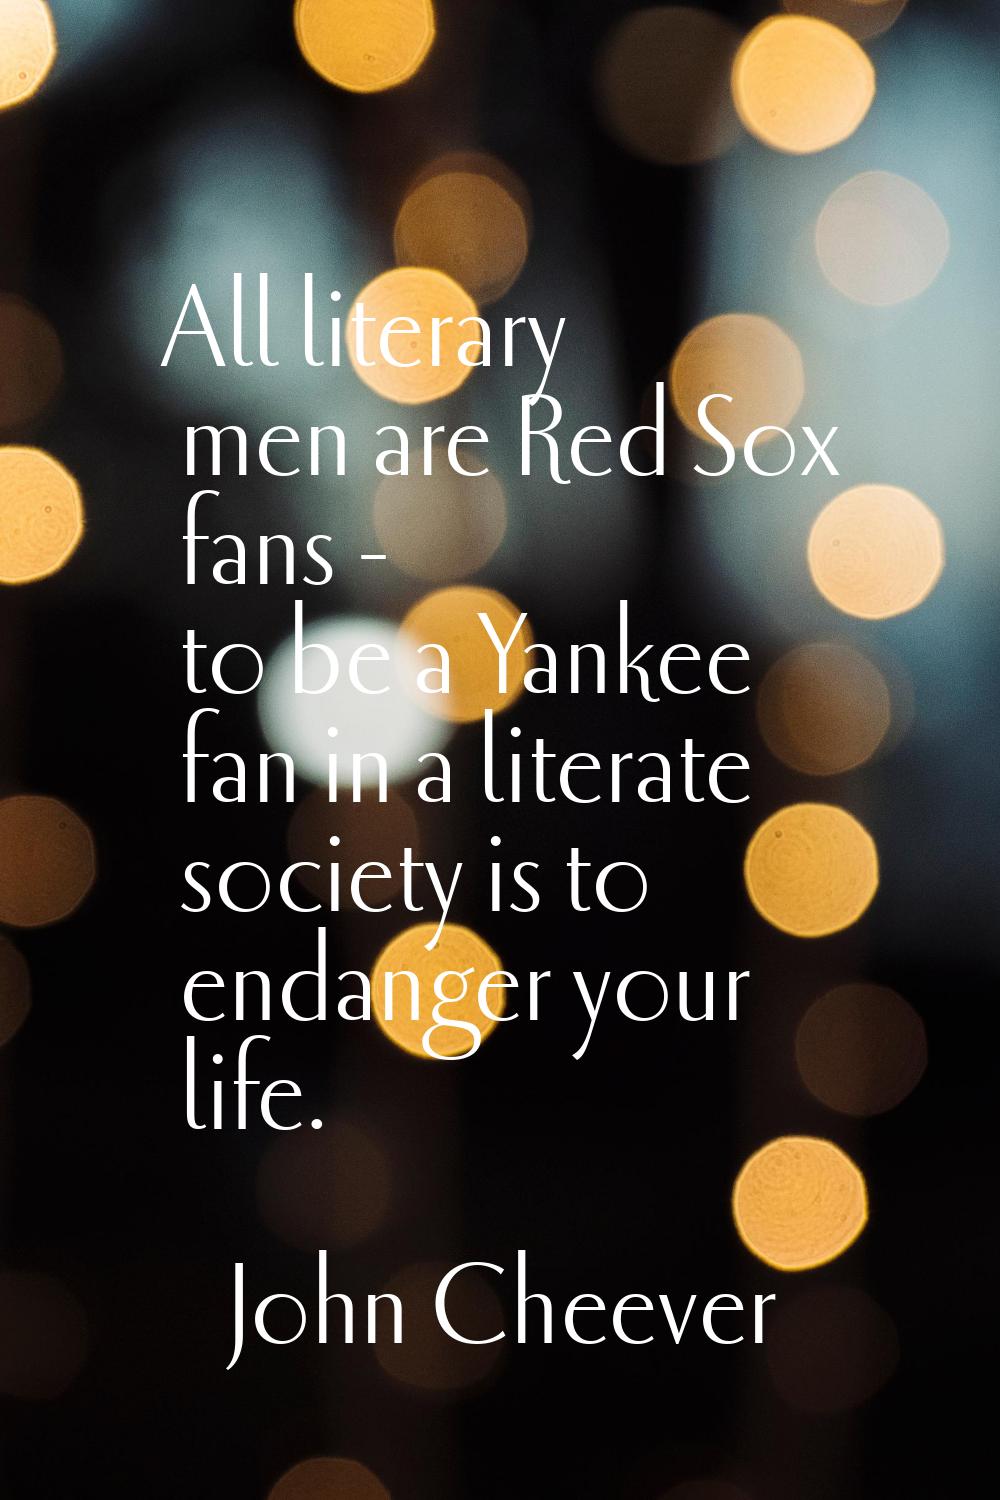 All literary men are Red Sox fans - to be a Yankee fan in a literate society is to endanger your li